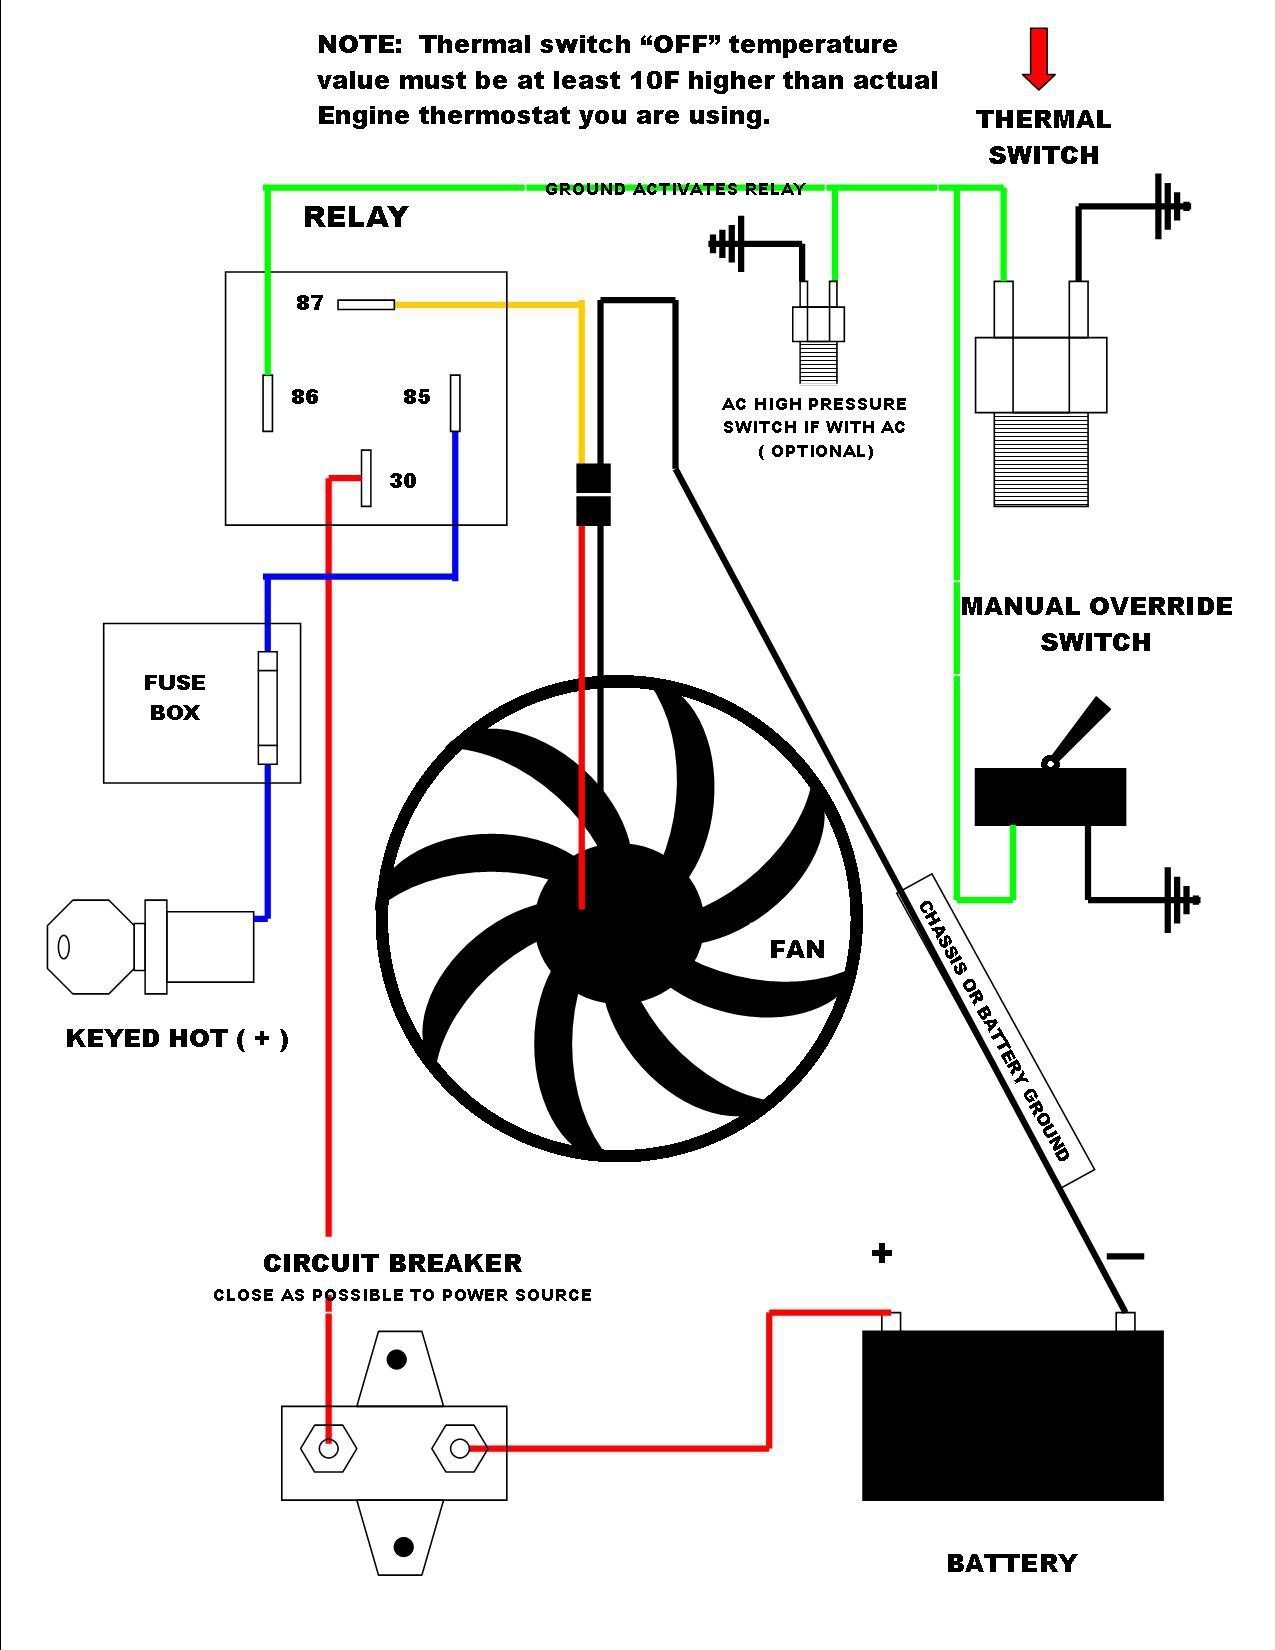 Cooling Fan Relay Wiring Diagram New Dual Relay Wiring Diagram Best Fresh Cooling Fan Relay Wiring